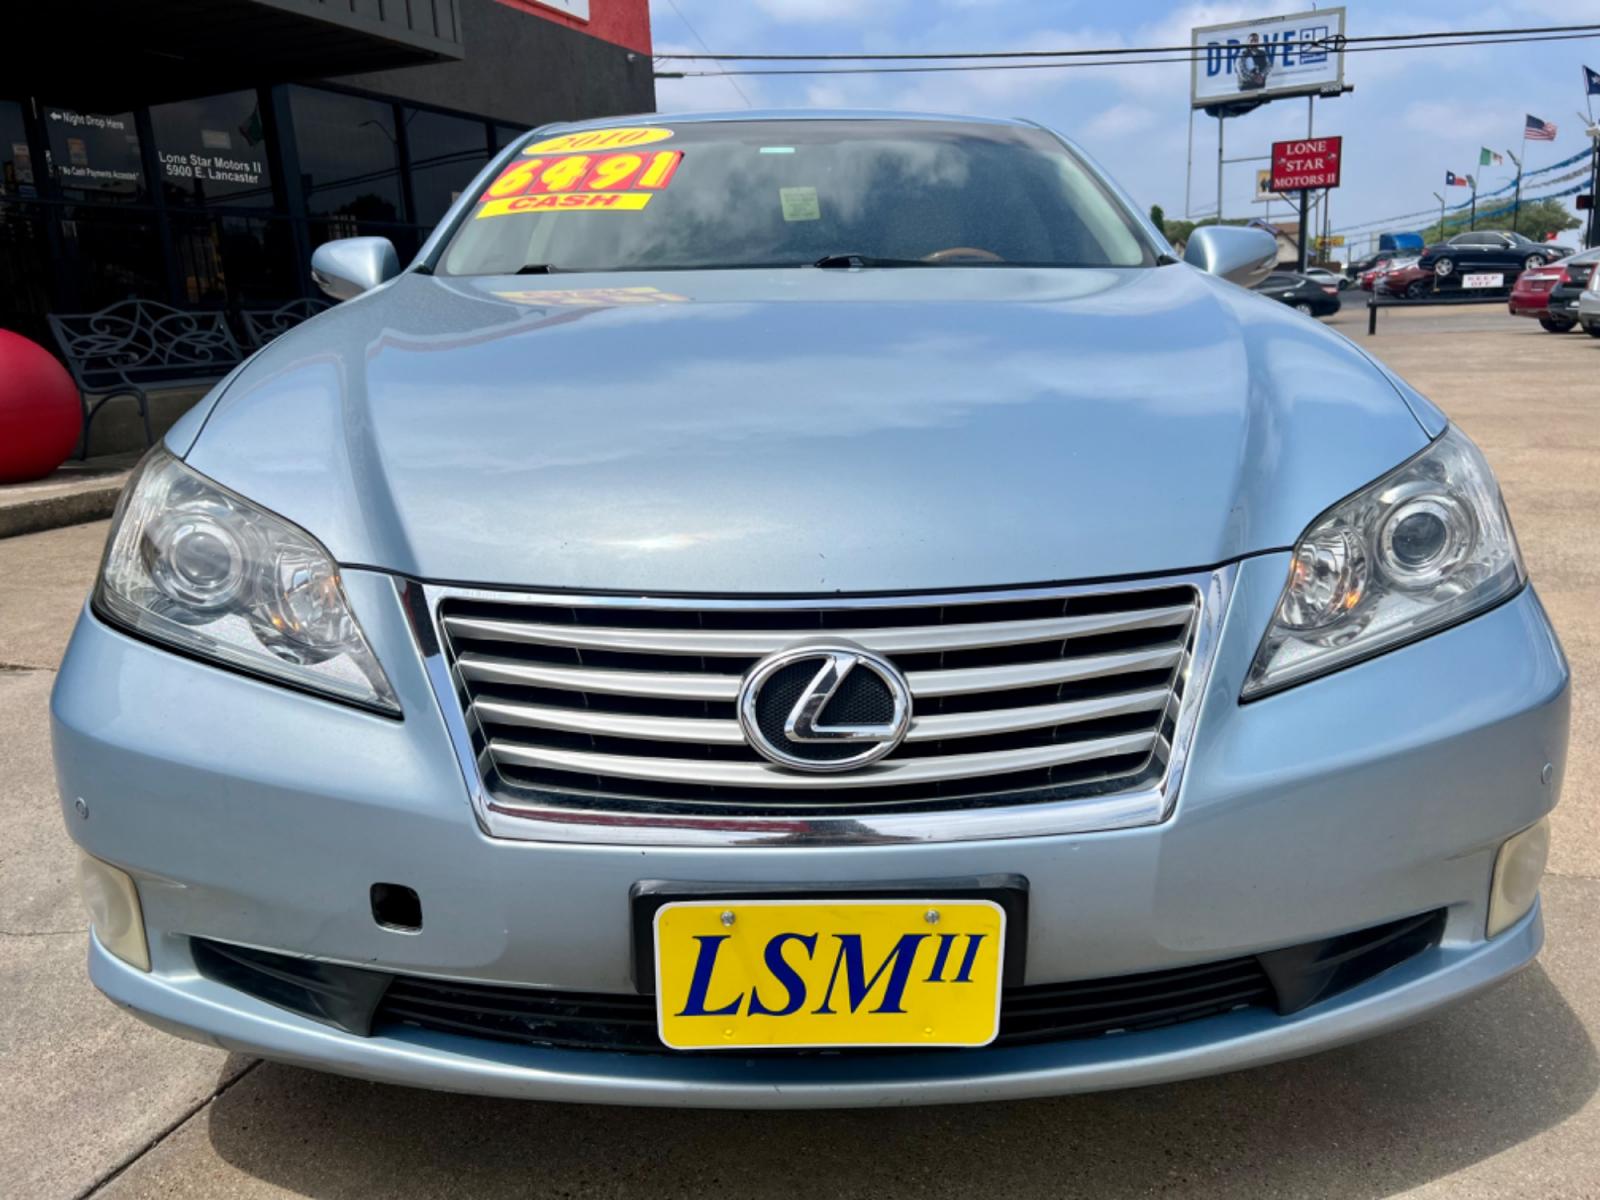 2010 BLUE /Tan LEXUS ES 350 BASE Base 4dr Sedan (JTHBK1EG3A2) with an 3.5L V6 engine, Automatic 6-Speed transmission, located at 5900 E. Lancaster Ave., Fort Worth, TX, 76112, (817) 457-5456, 0.000000, 0.000000 - Cash CASH CAR ONLY, NO FINANCING AVAILABLE. THIS 2010 LEXUS ES 350 BASE 4 DOOR SEDAN RUNS AND DRIVES GREAT. IT IS EQUIPPED WITH A CD PLAYER, AM/FM RADIO AND AN AUX PORT. THE TIRES ARE IN GOOD CONDITION AND STILL HAVE TREAD LEFT ON THEM. THIS CAR WILL NOT LAST SO ACT FAST! Call or text Fran - Photo #2